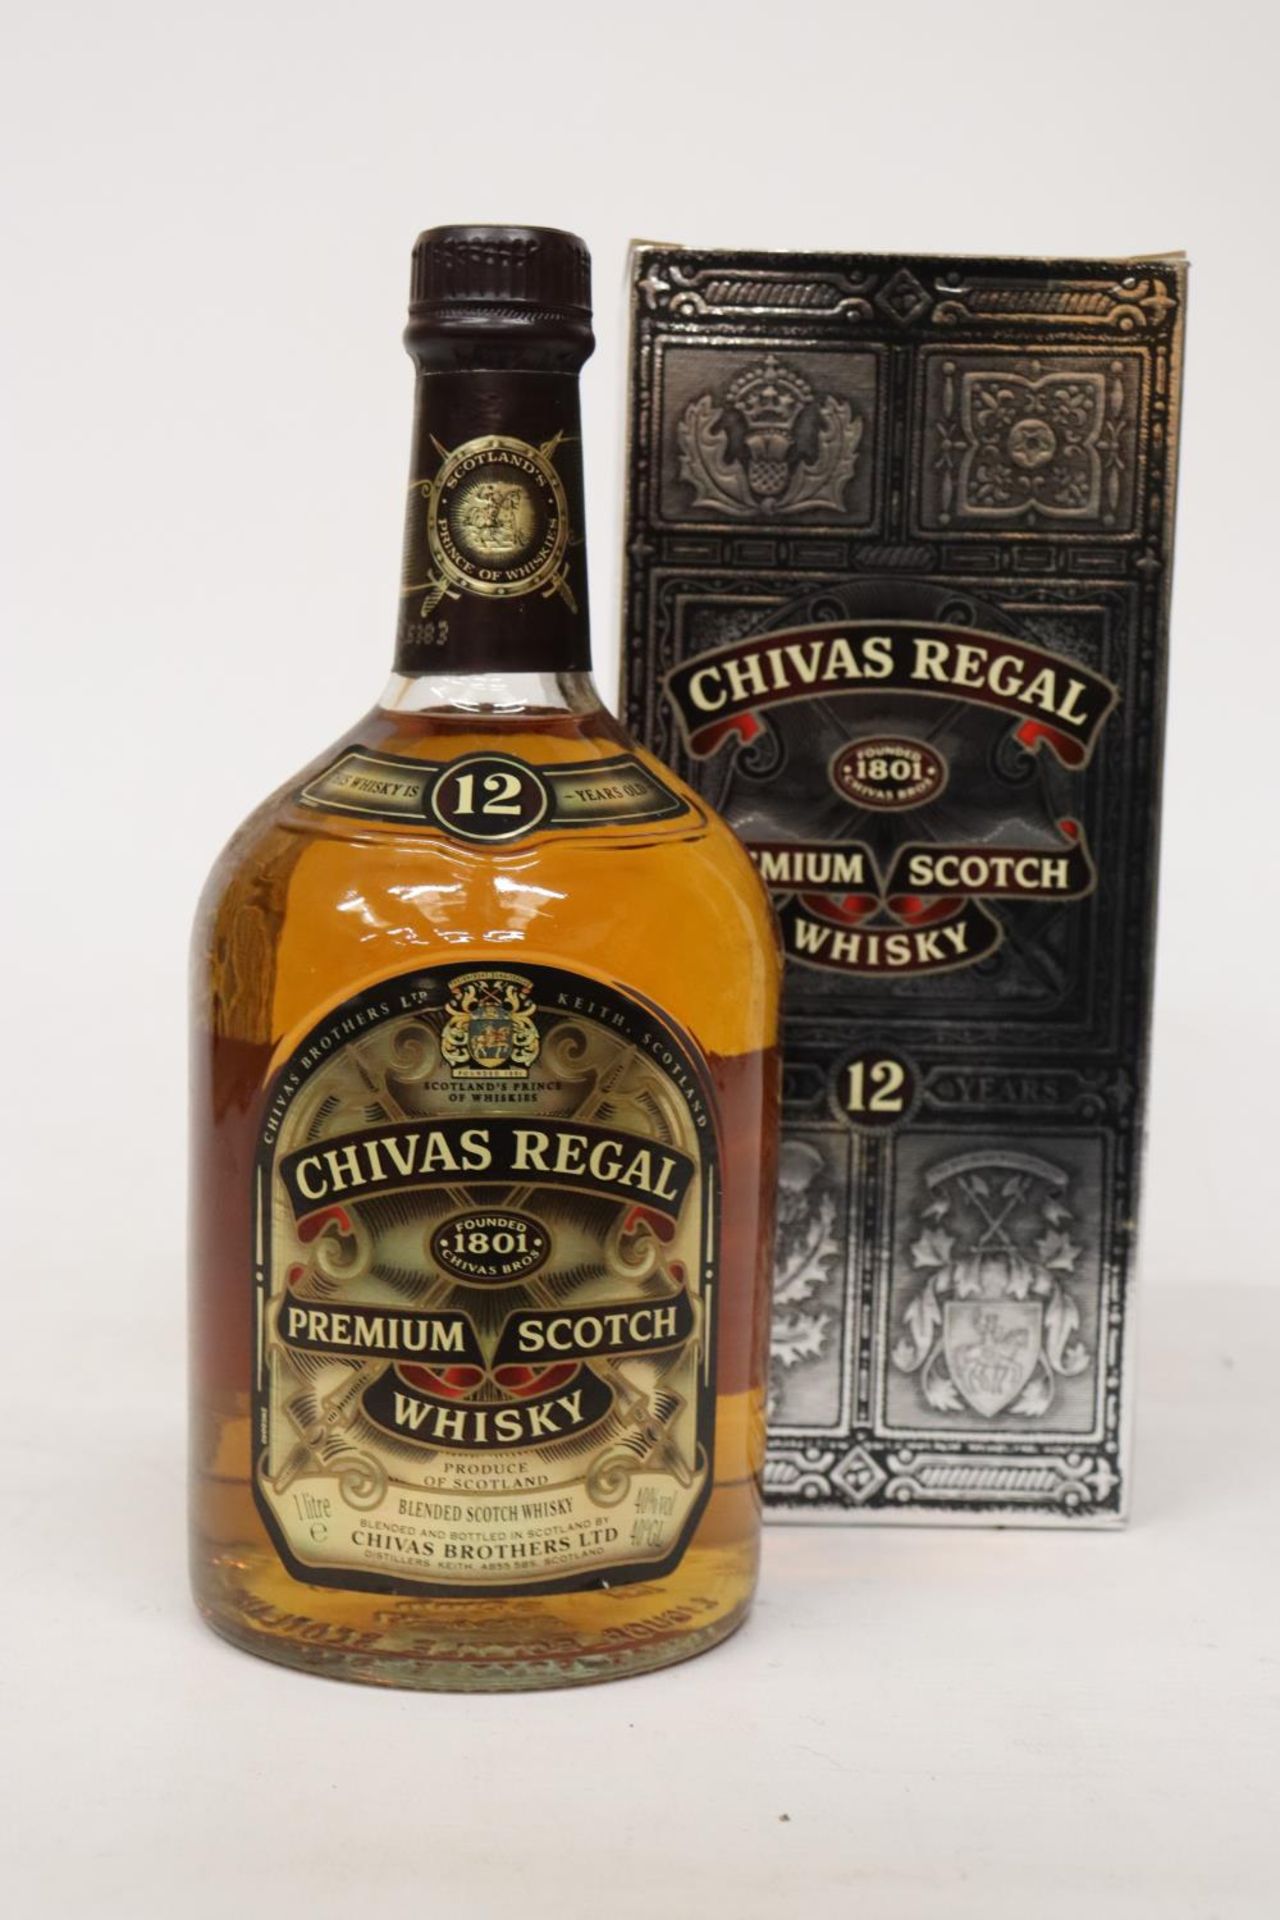 A BOTTLE OF CHIVAS REGAL 12 YEAR OLD WHISKY, BOXED